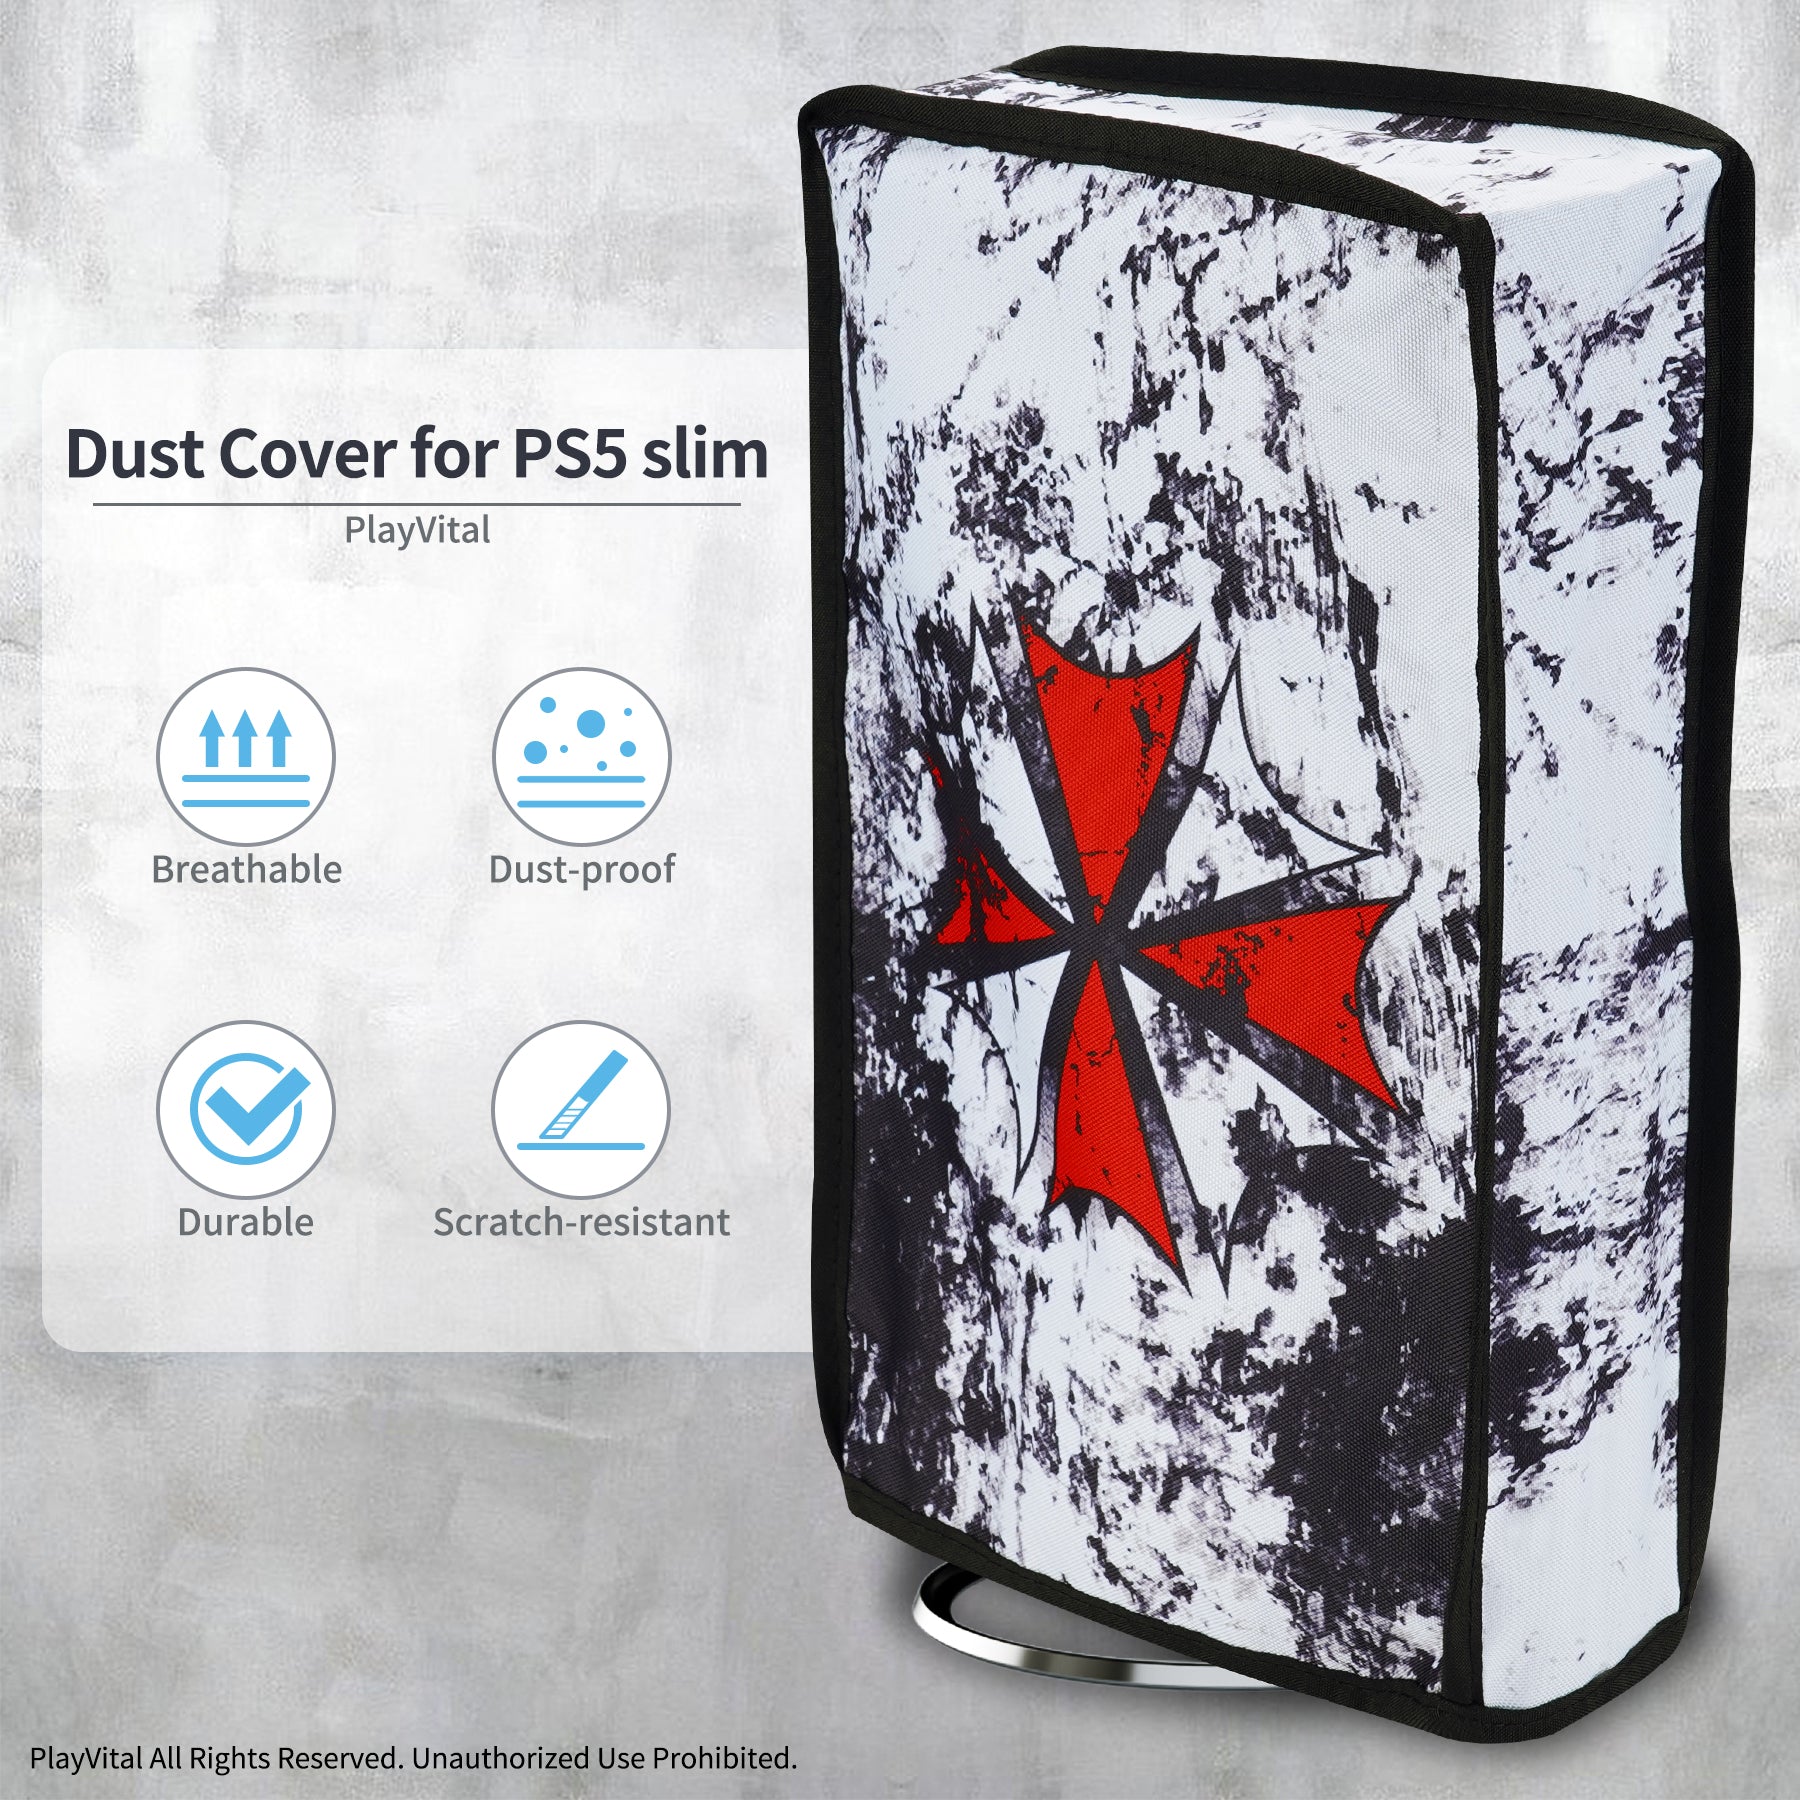 PlayVital Vertical Dust Cover for ps5 Slim Disc Edition(The New Smaller Design), Nylon Dust Proof Protector Waterproof Cover Sleeve for ps5 Slim Console - Biohazard - BMYPFH003 PlayVital